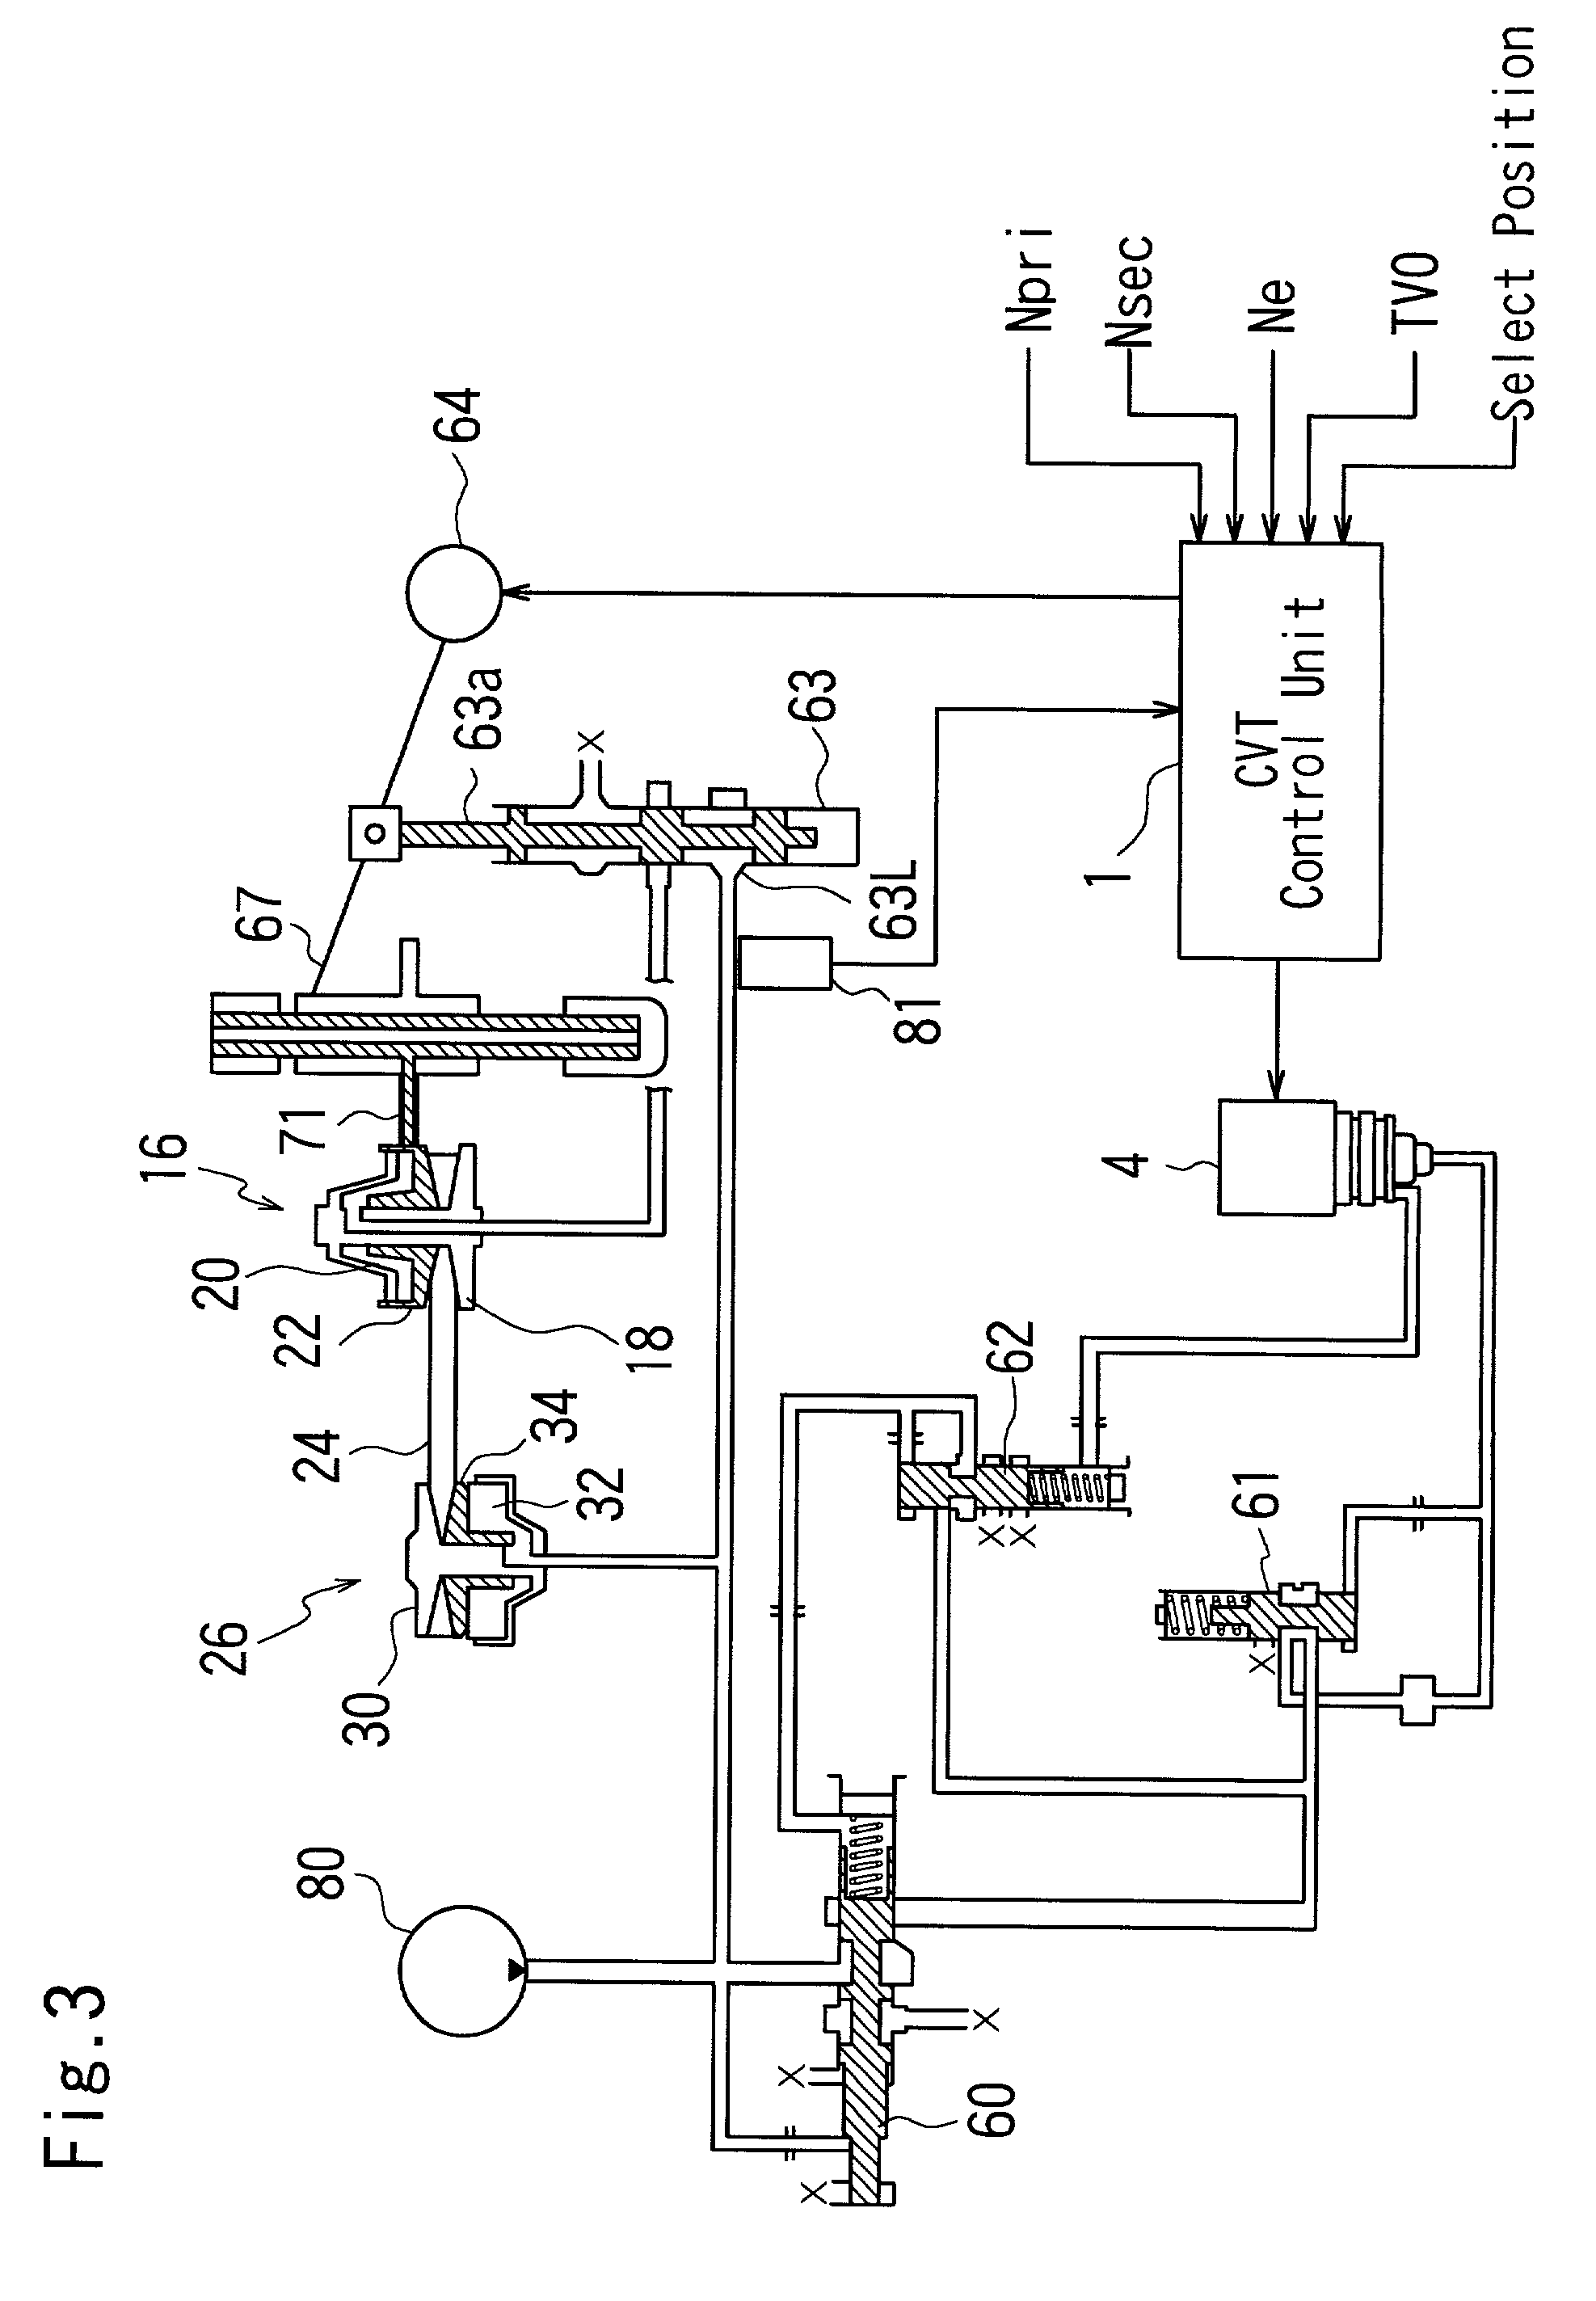 Hydraulic control system for a continuously variable transmission